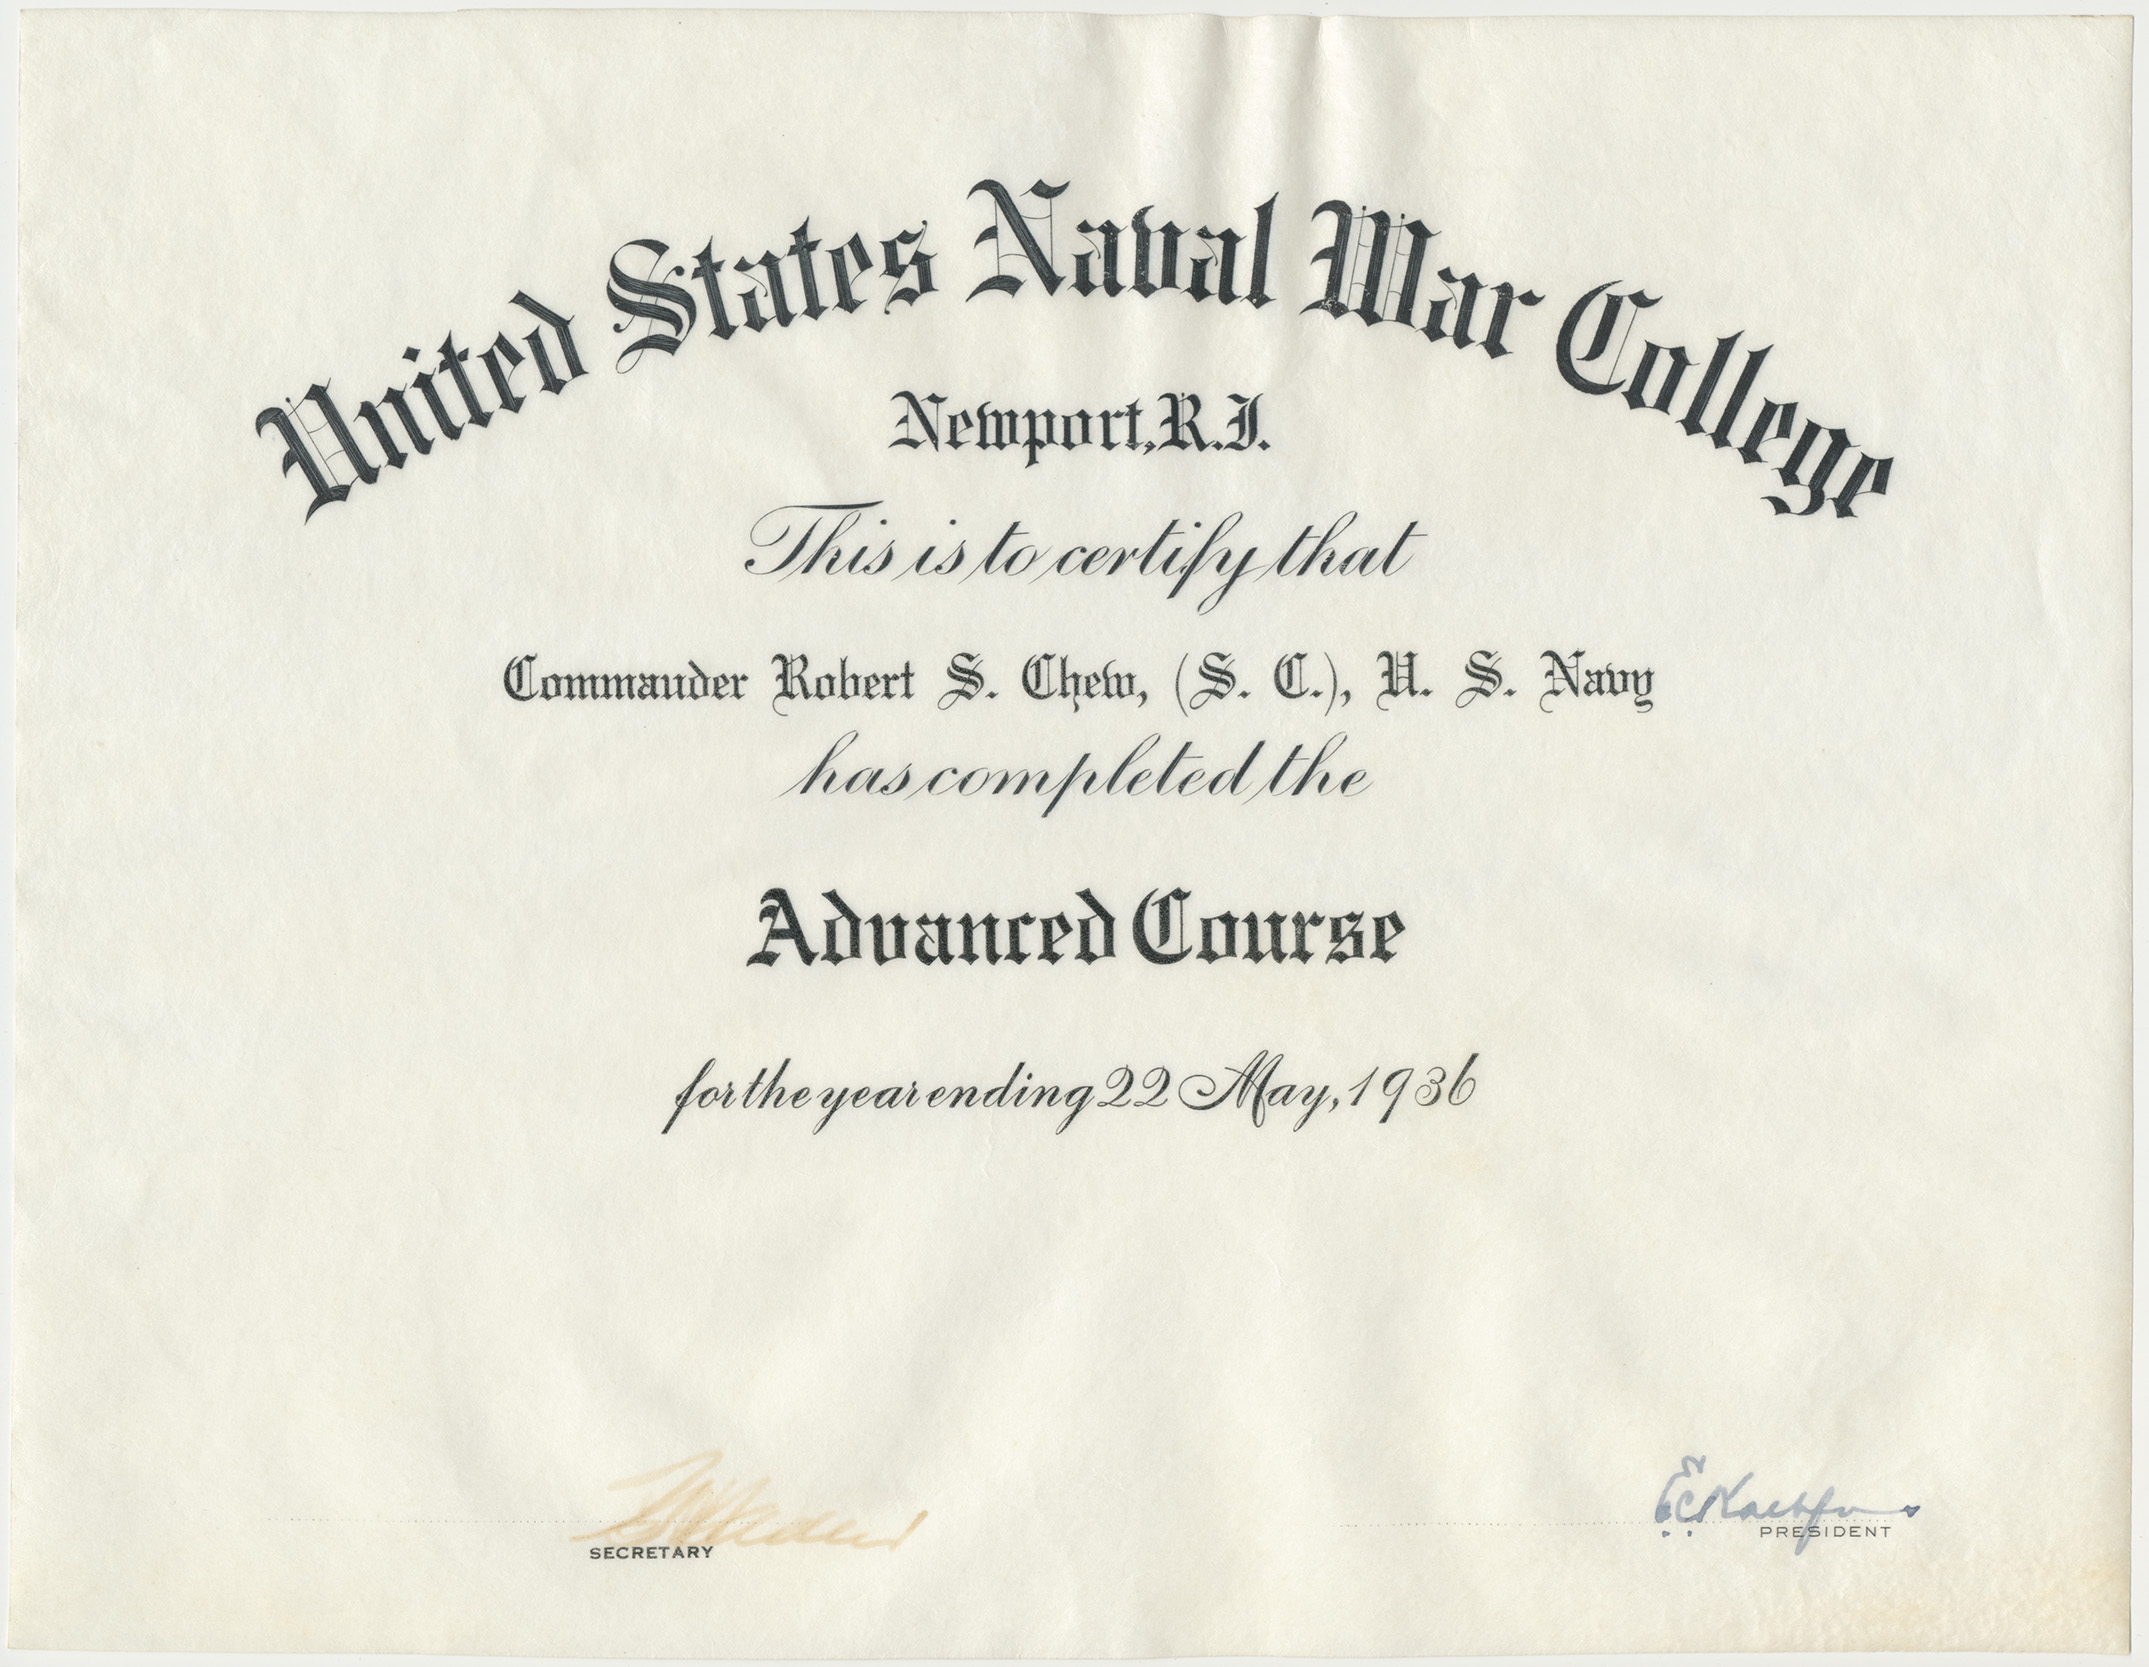 Robert S. Chew diploma for NWC Advanced Course